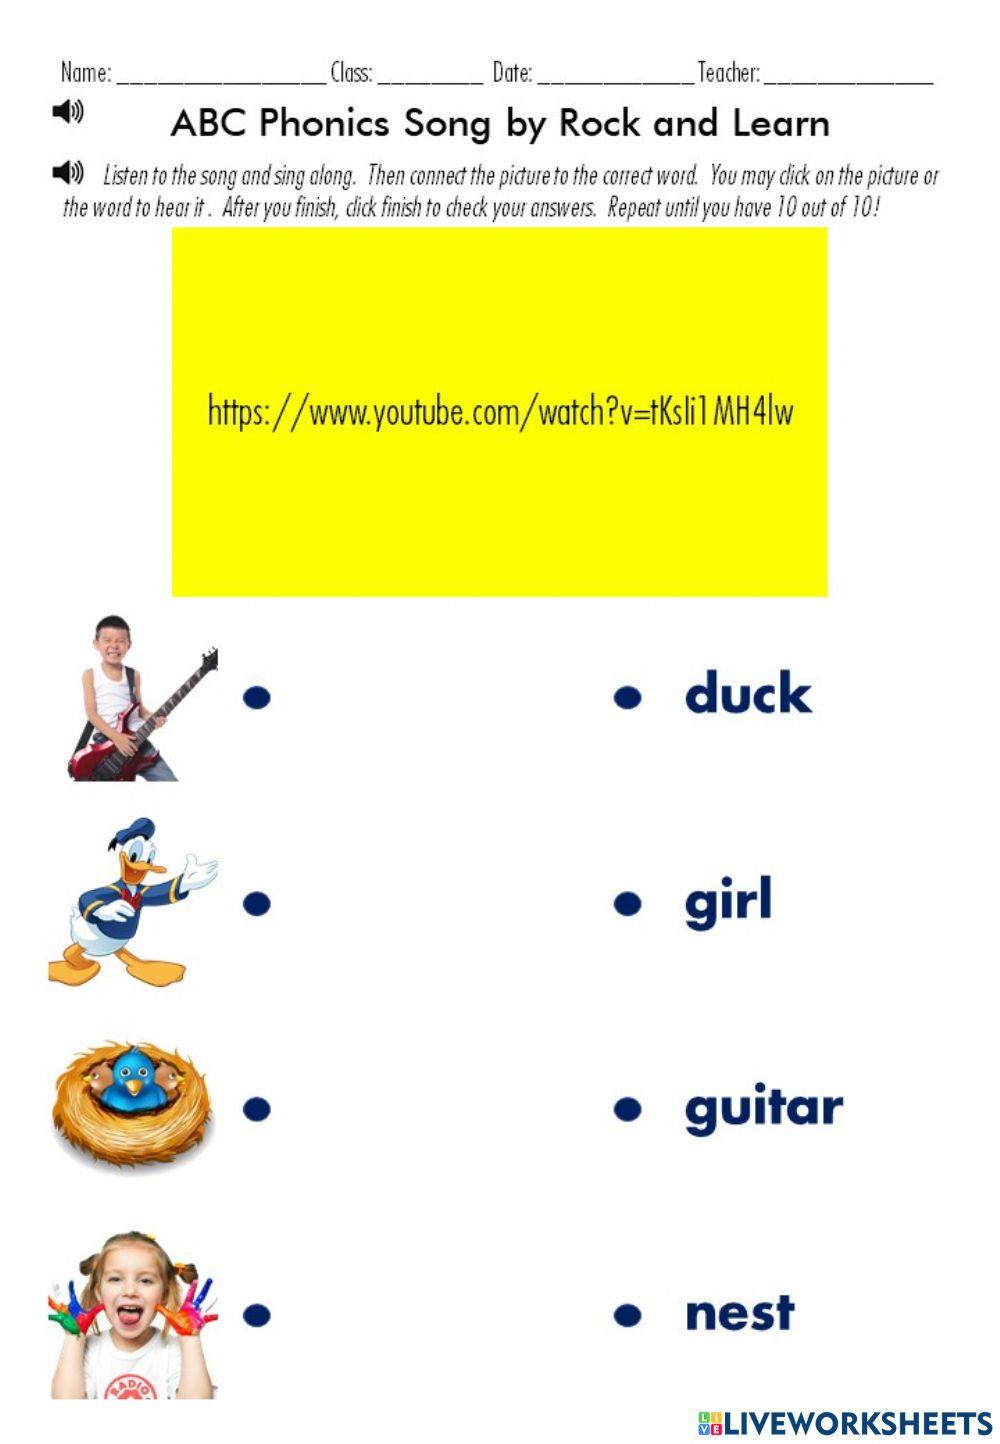 Meet the Letter G! ABC Phonics Song by Rock and Learn